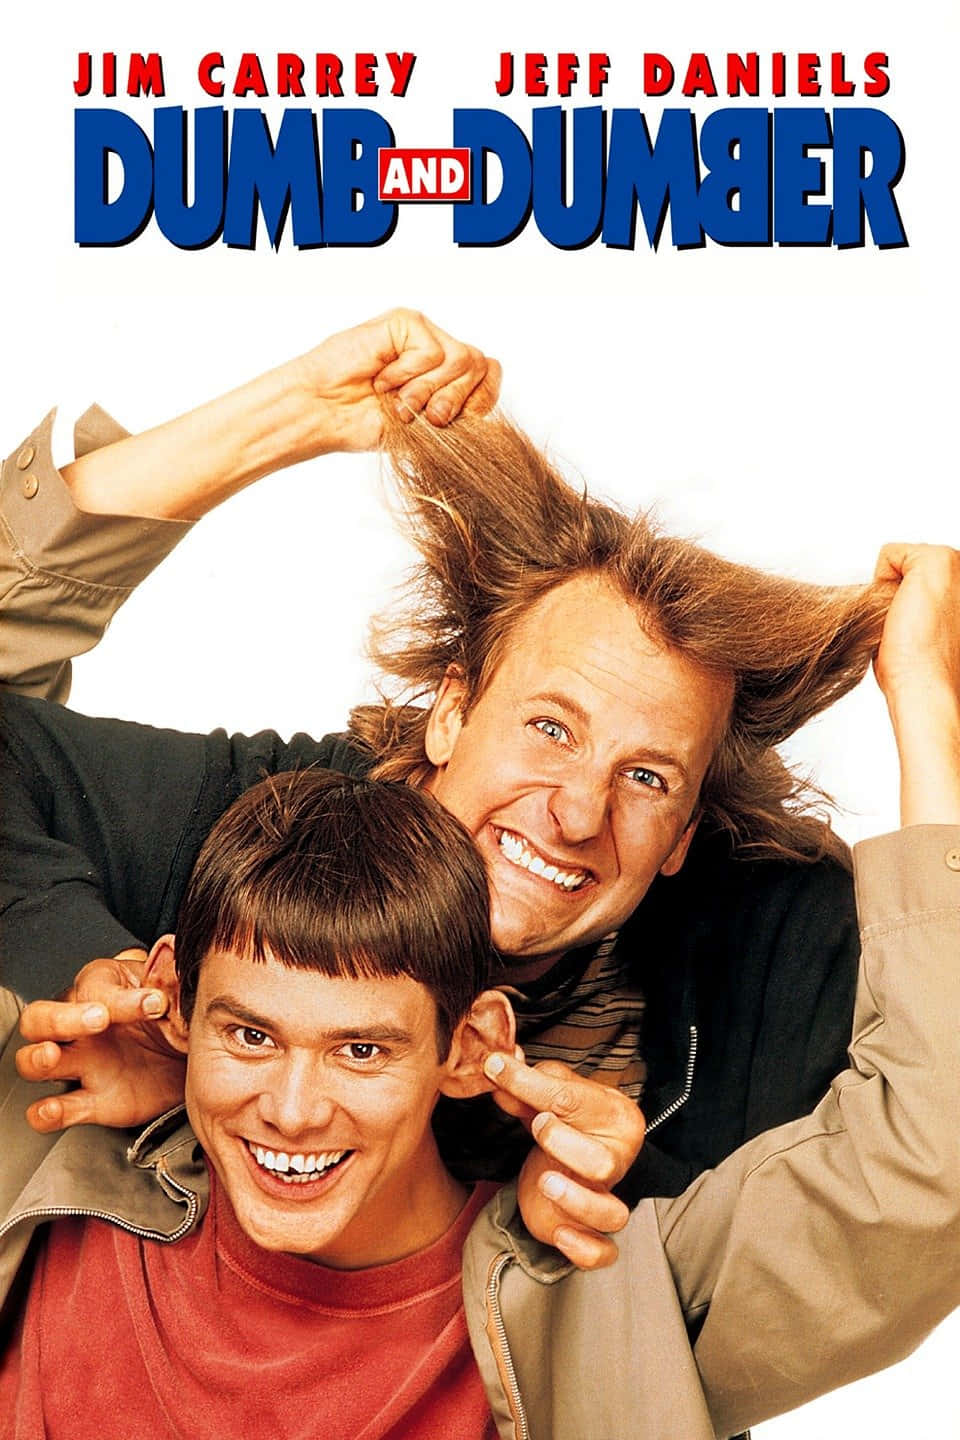 Lloyd Christmas and Harry Dunne, the lovable duo from Dumb And Dumber